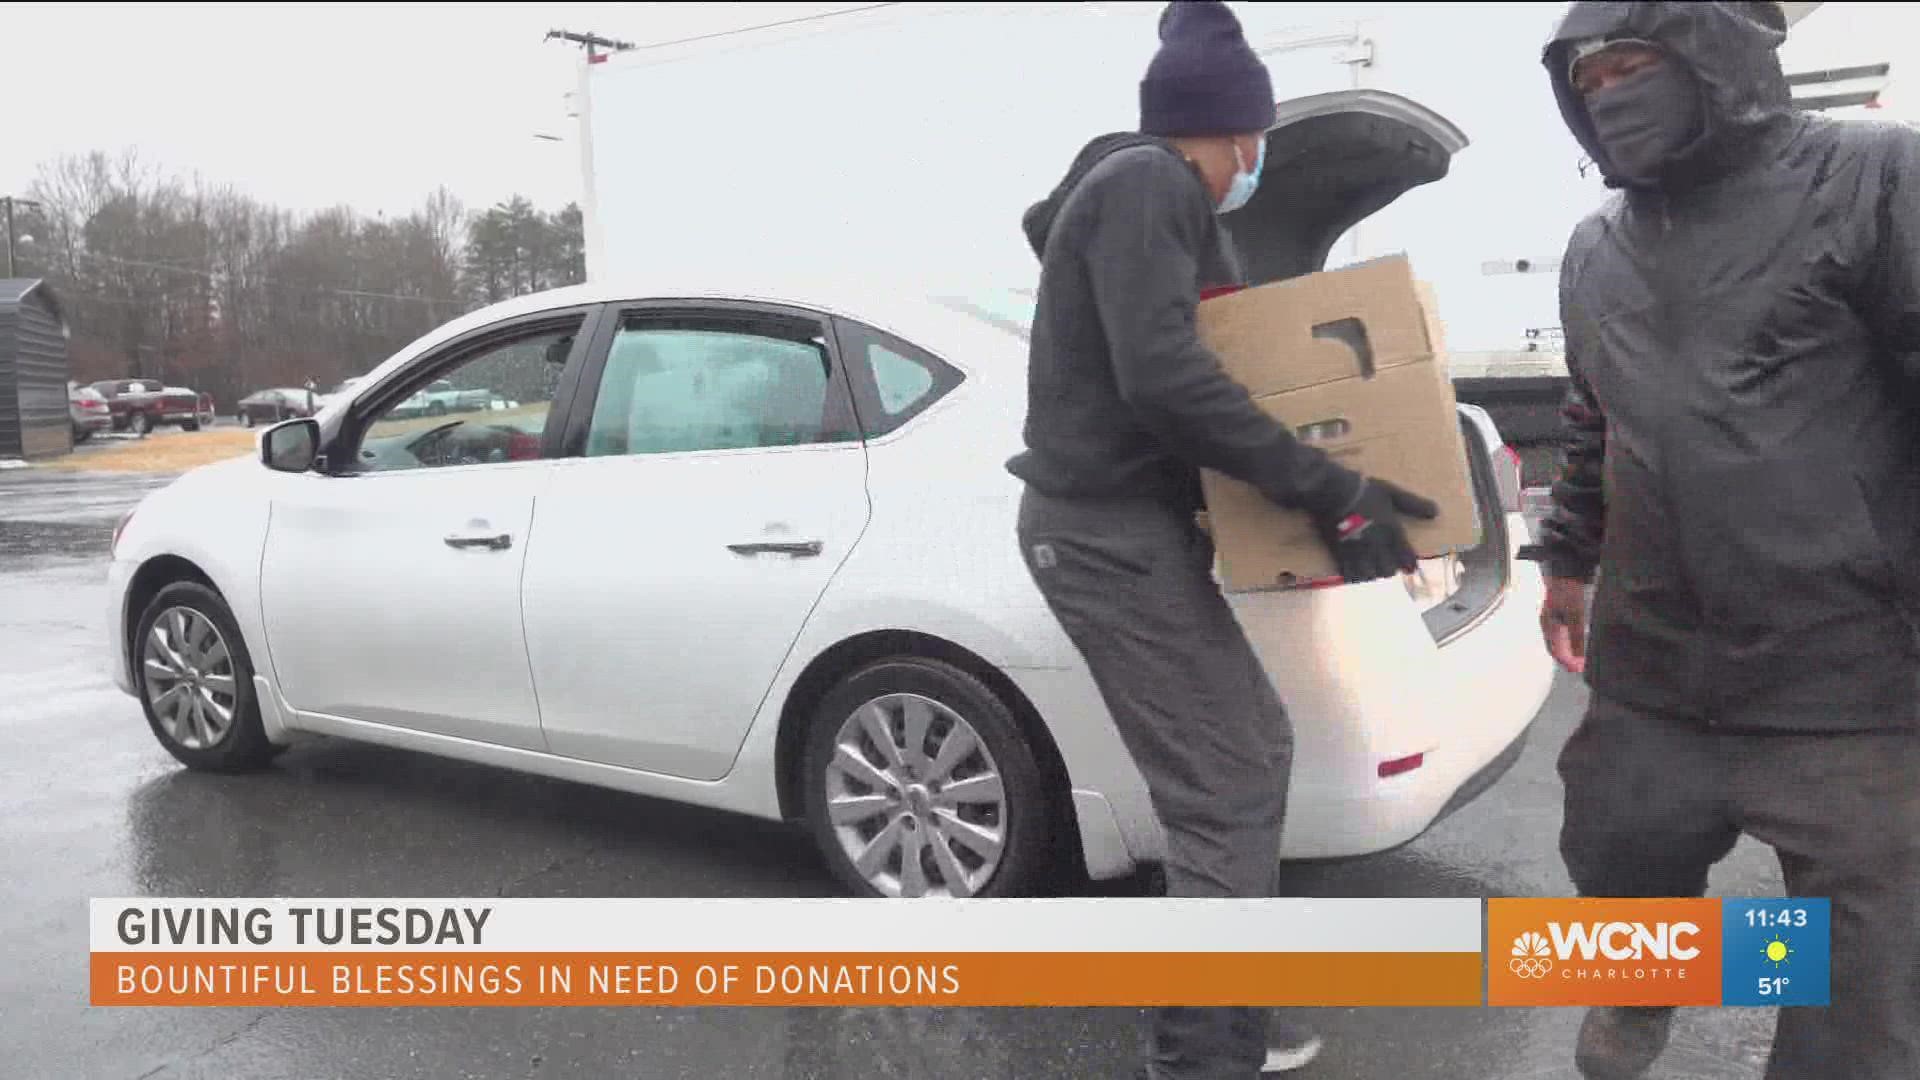 How to help Bountiful Blessings in Gastonia this Giving Tuesday.